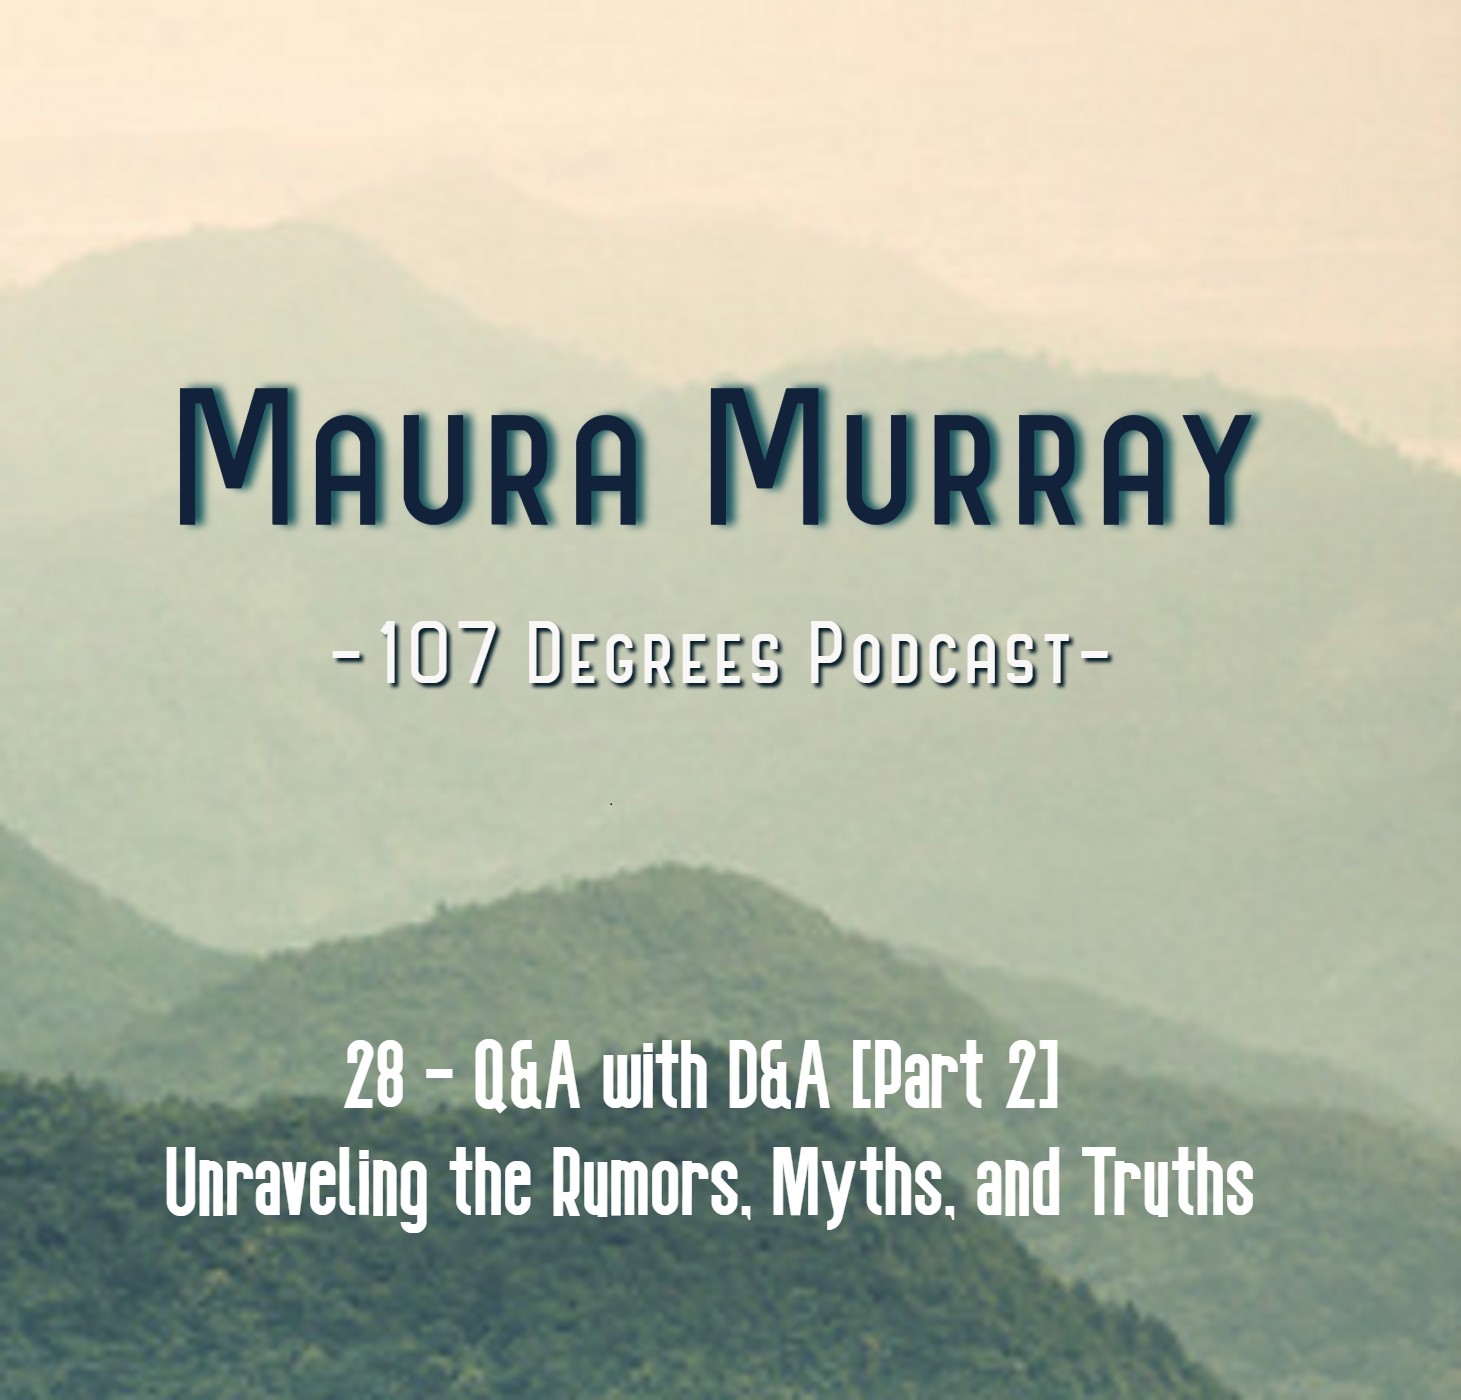 28: Q&A with D&A [Part 2]: Unraveling the Rumors, Myths, and Truths